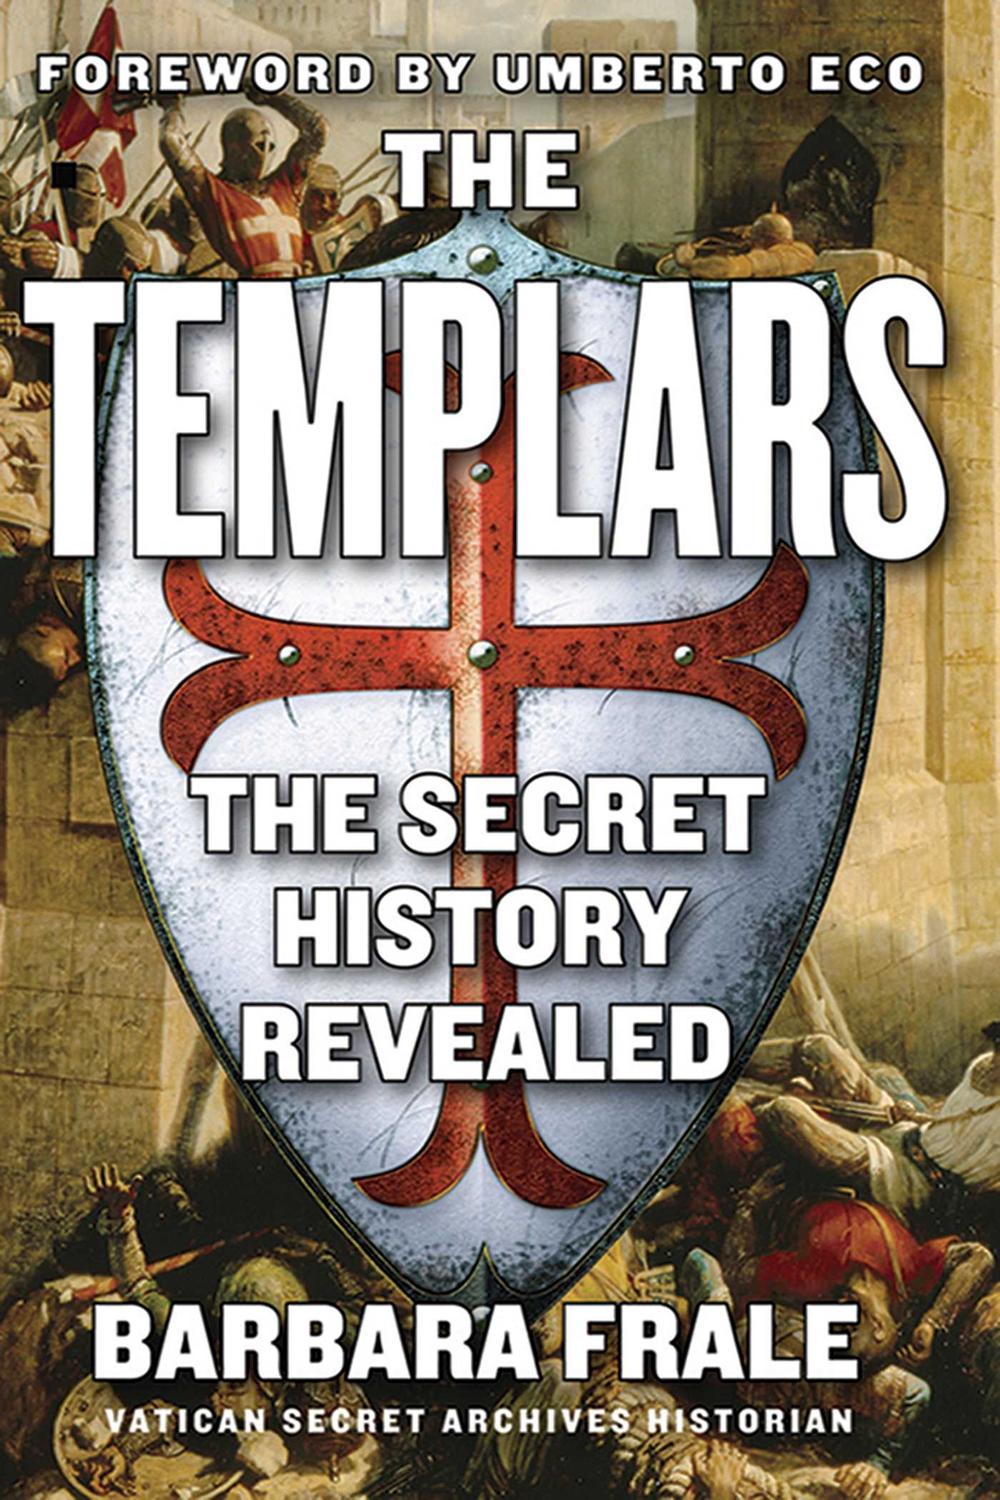 The Templars - Barbara Frale, Gregory Conti